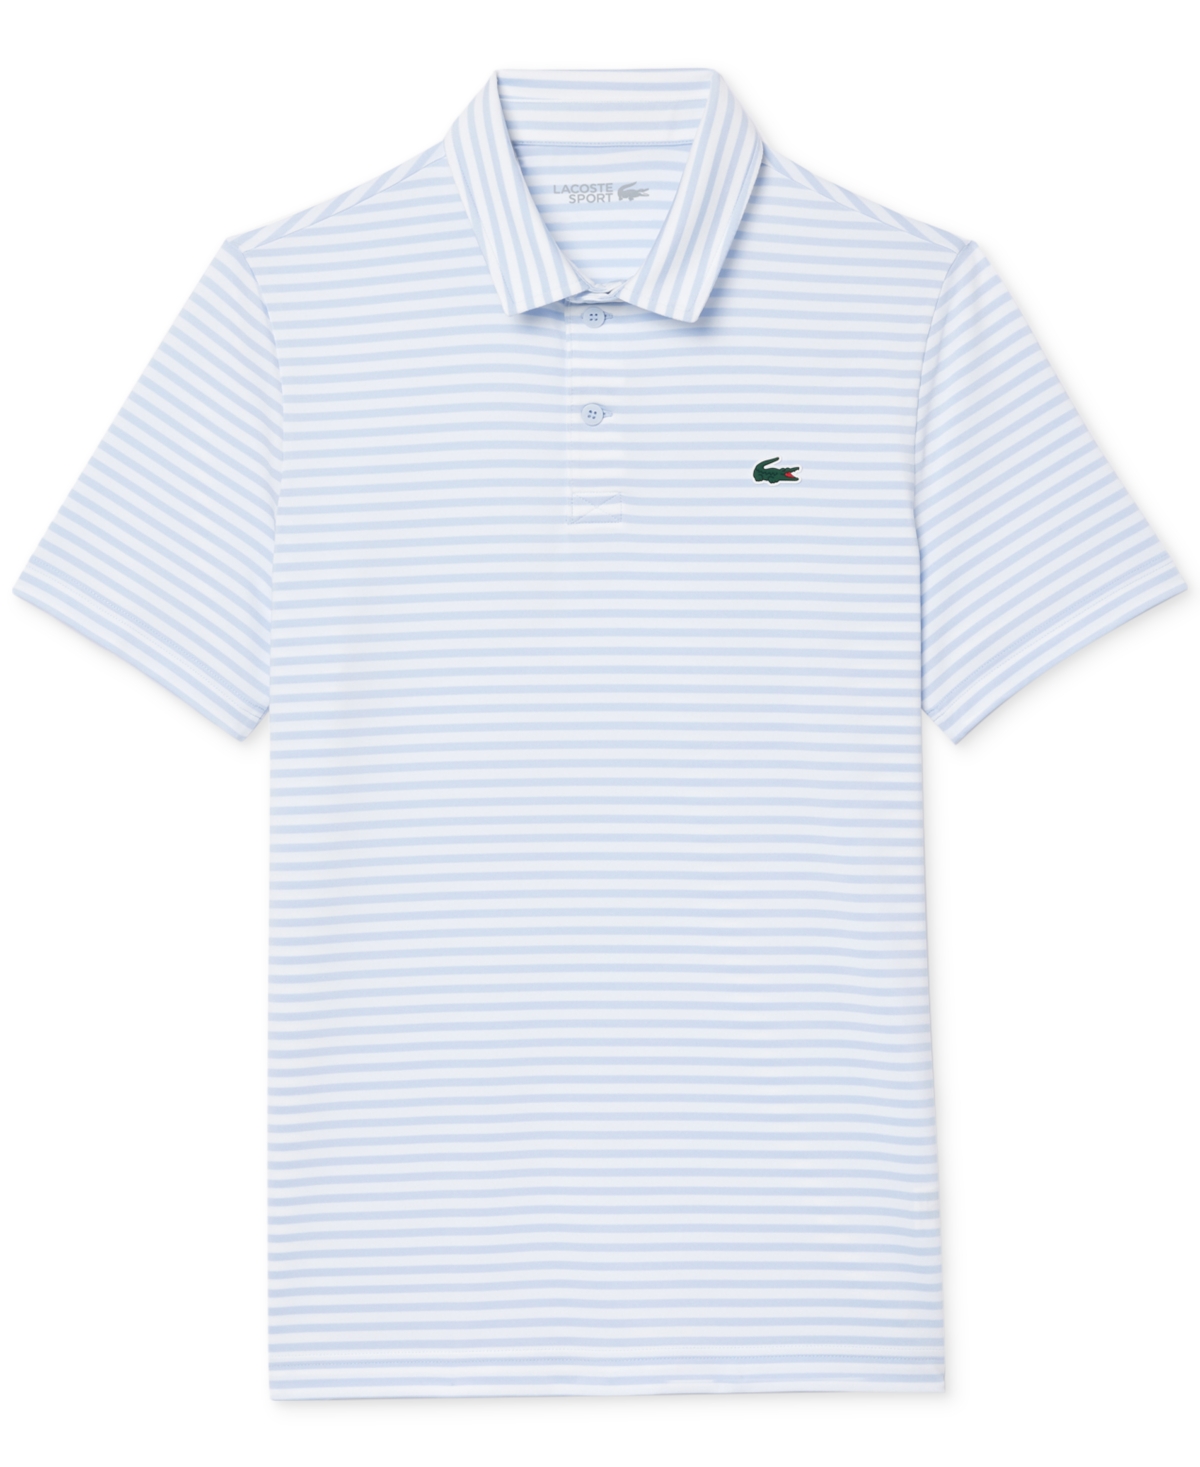 Lacoste Men's Short Sleeve Striped Performance Polo Shirt In S Alice,blanc